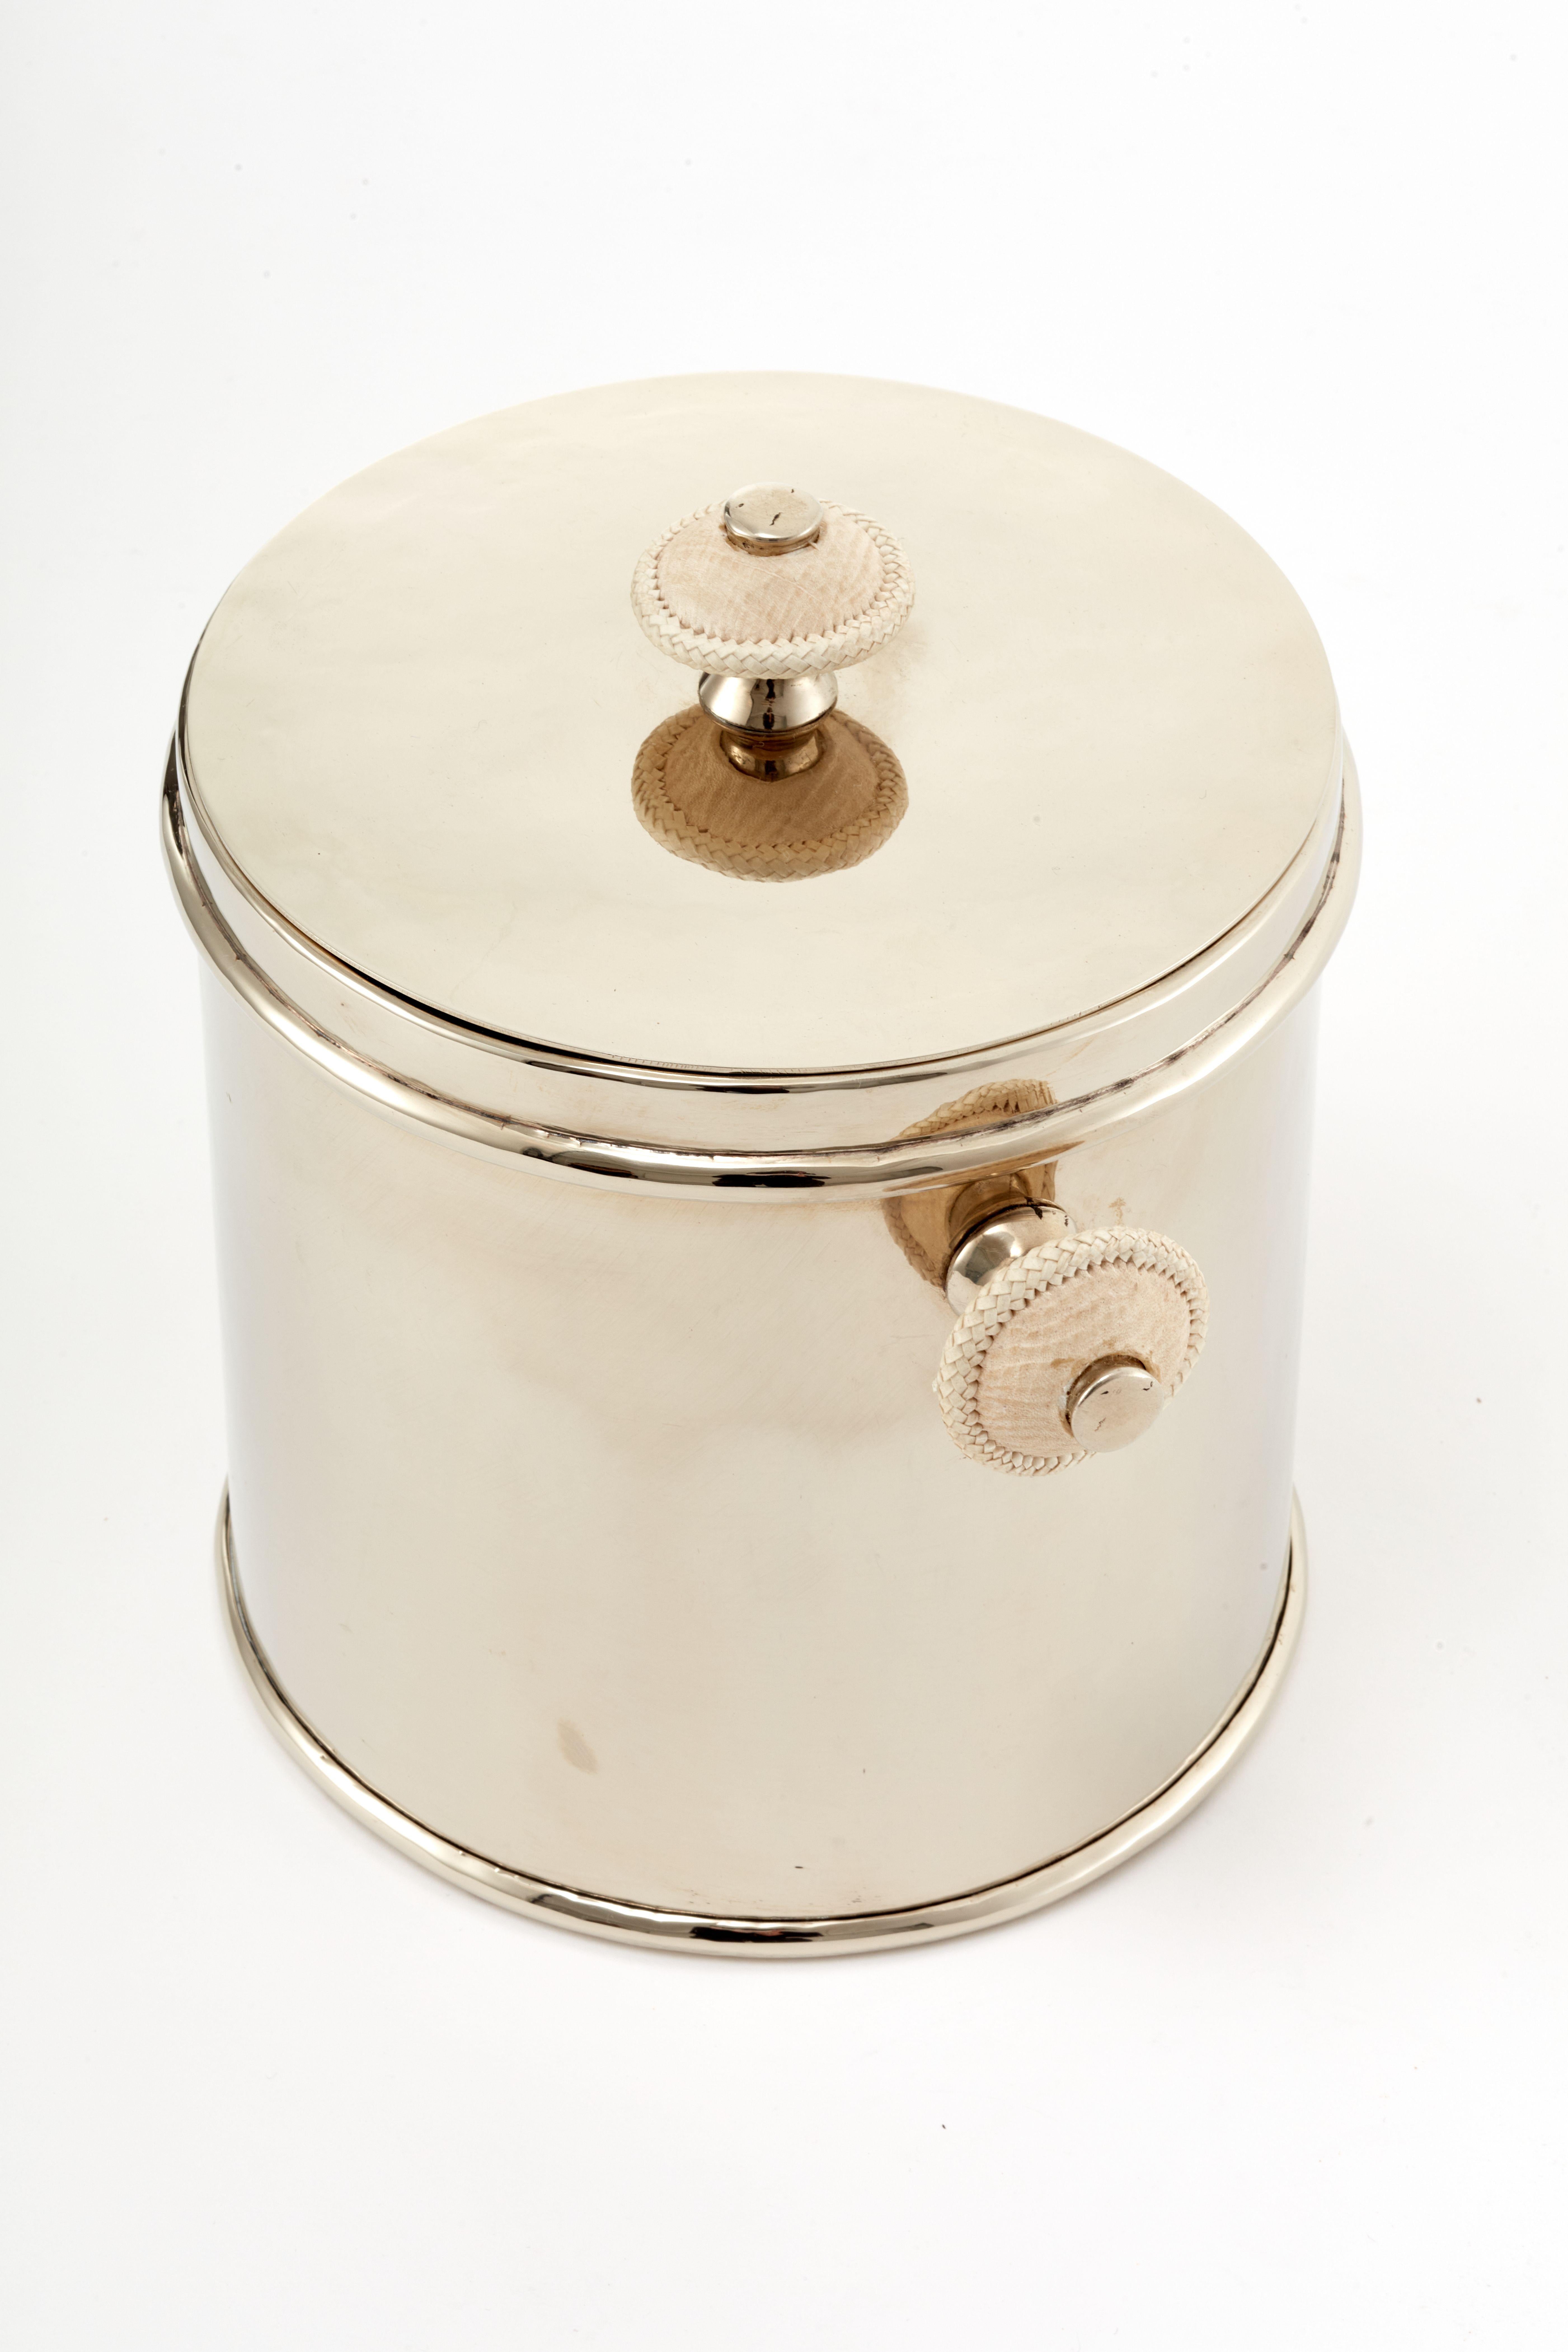 Polished Salta Leather Ice Bucket, Alcapa Silver & Goat Leather For Sale